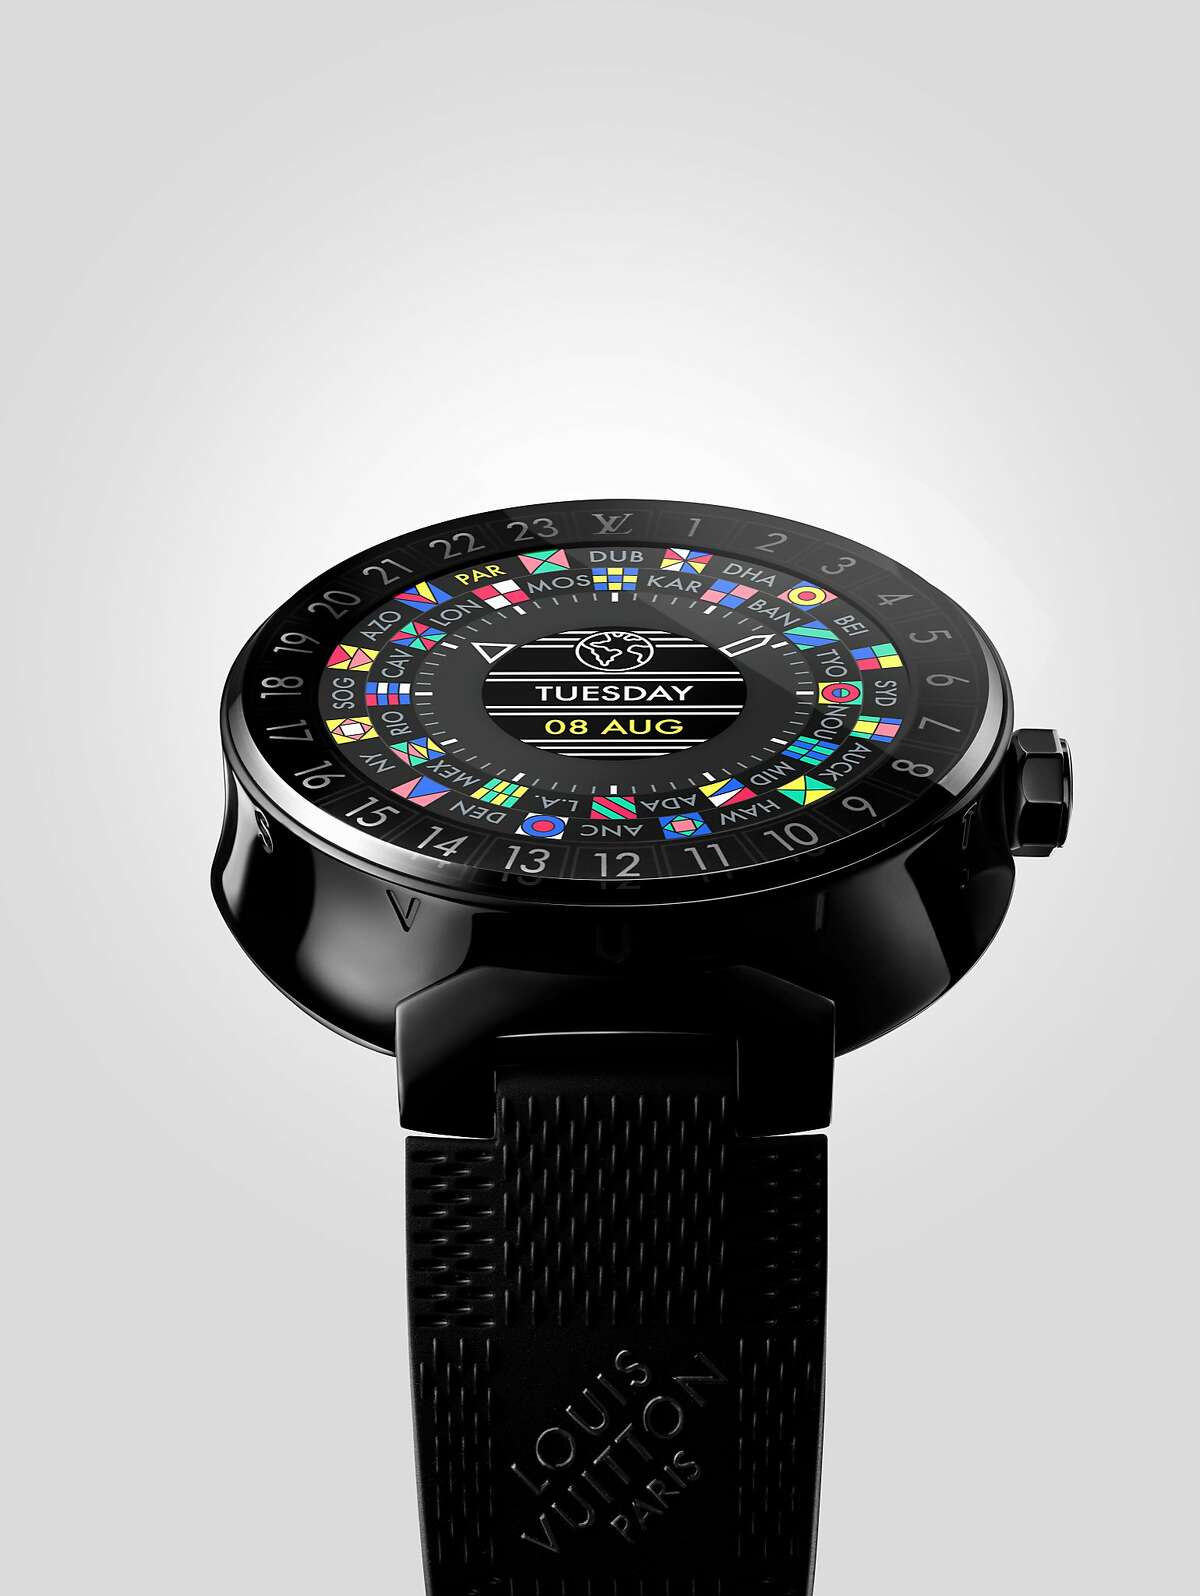 The Tambour Horizon smart watch is a new offering in the luxury market.